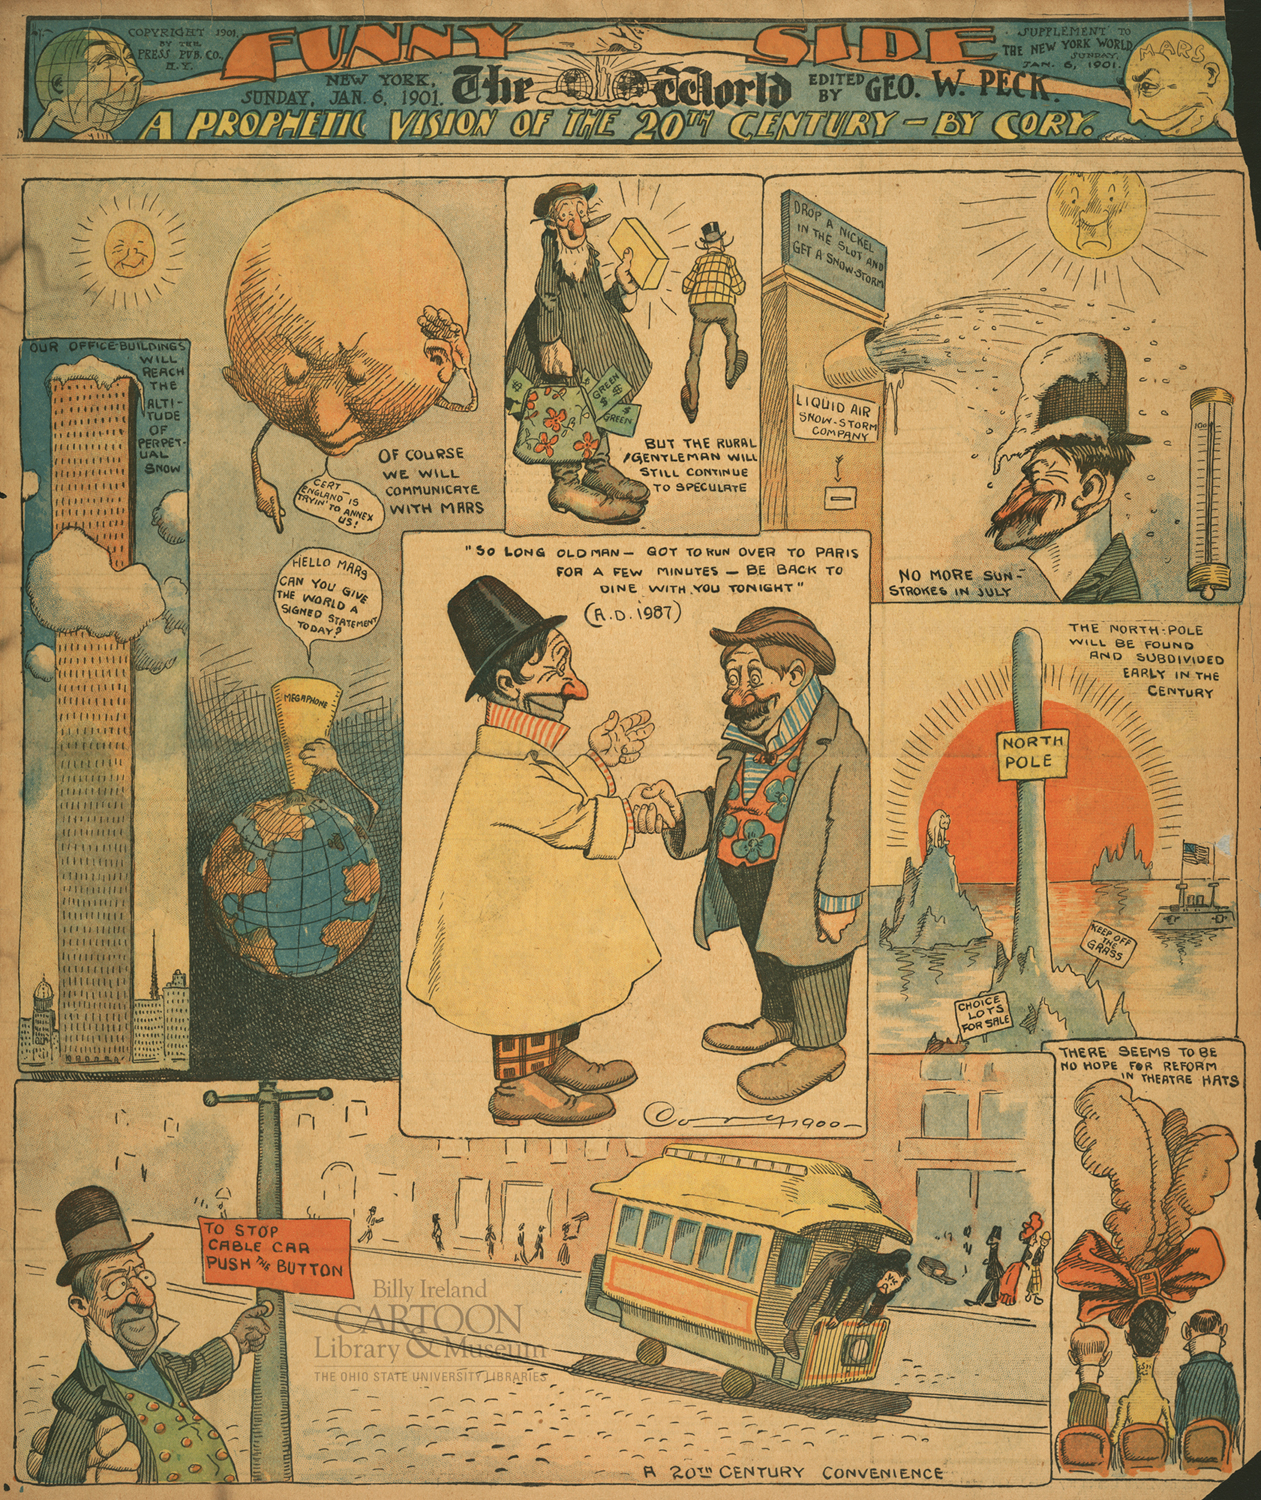 This 1901 Cartoon Takes A Humorous Look At The Future Of New York